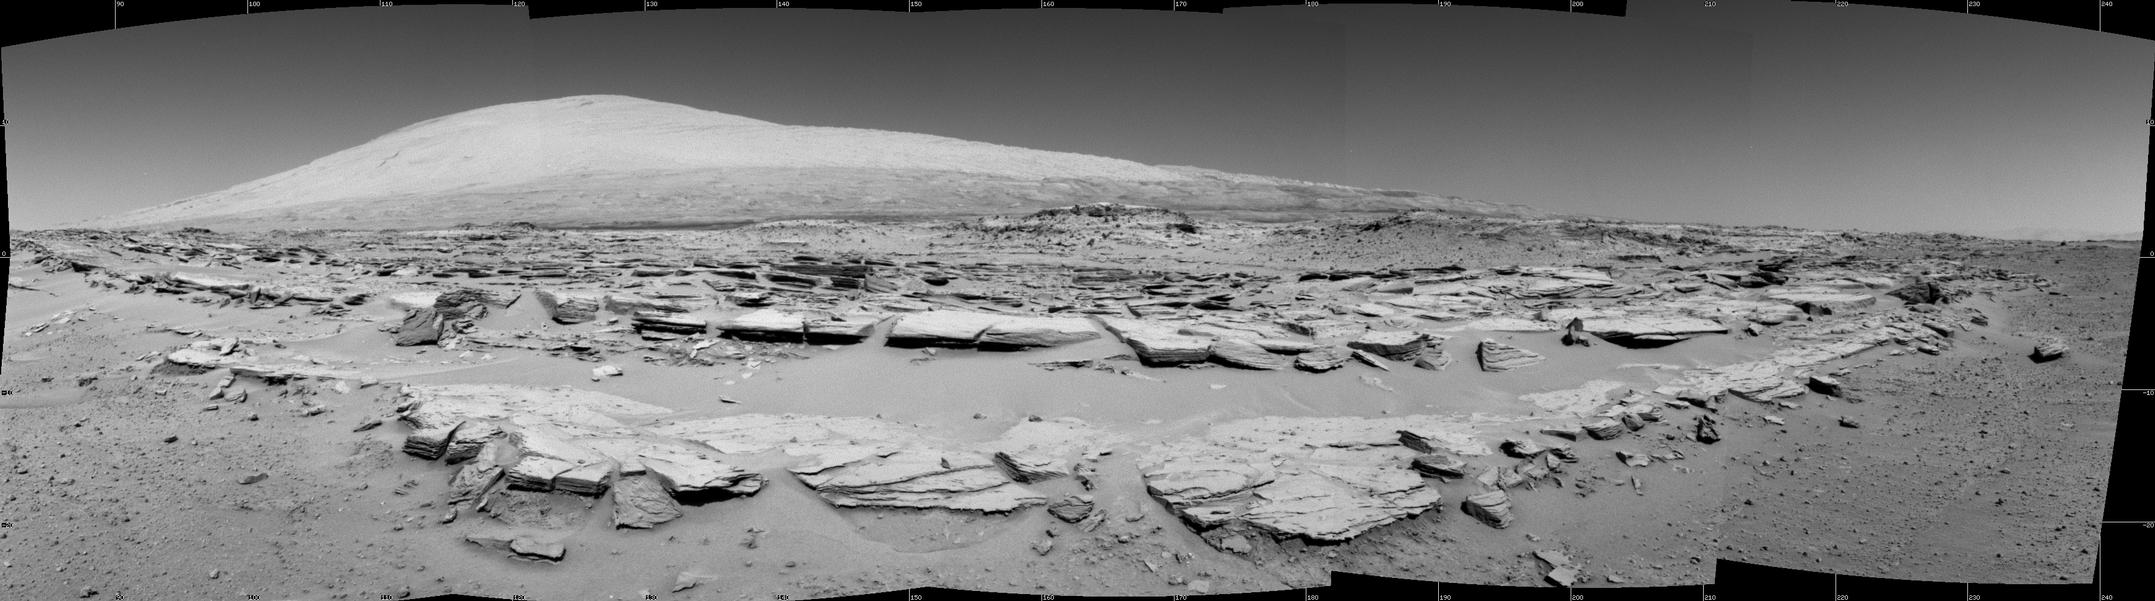 A landscape scene from NASA's Curiosity Mars rover shows rock rows at "Junda" forming striations in the foreground, with Mount Sharp on the horizon. The component images were taken by the rover's Navigation Camera (Navcam), looking southward, during a pause in driving on Feb. 19.